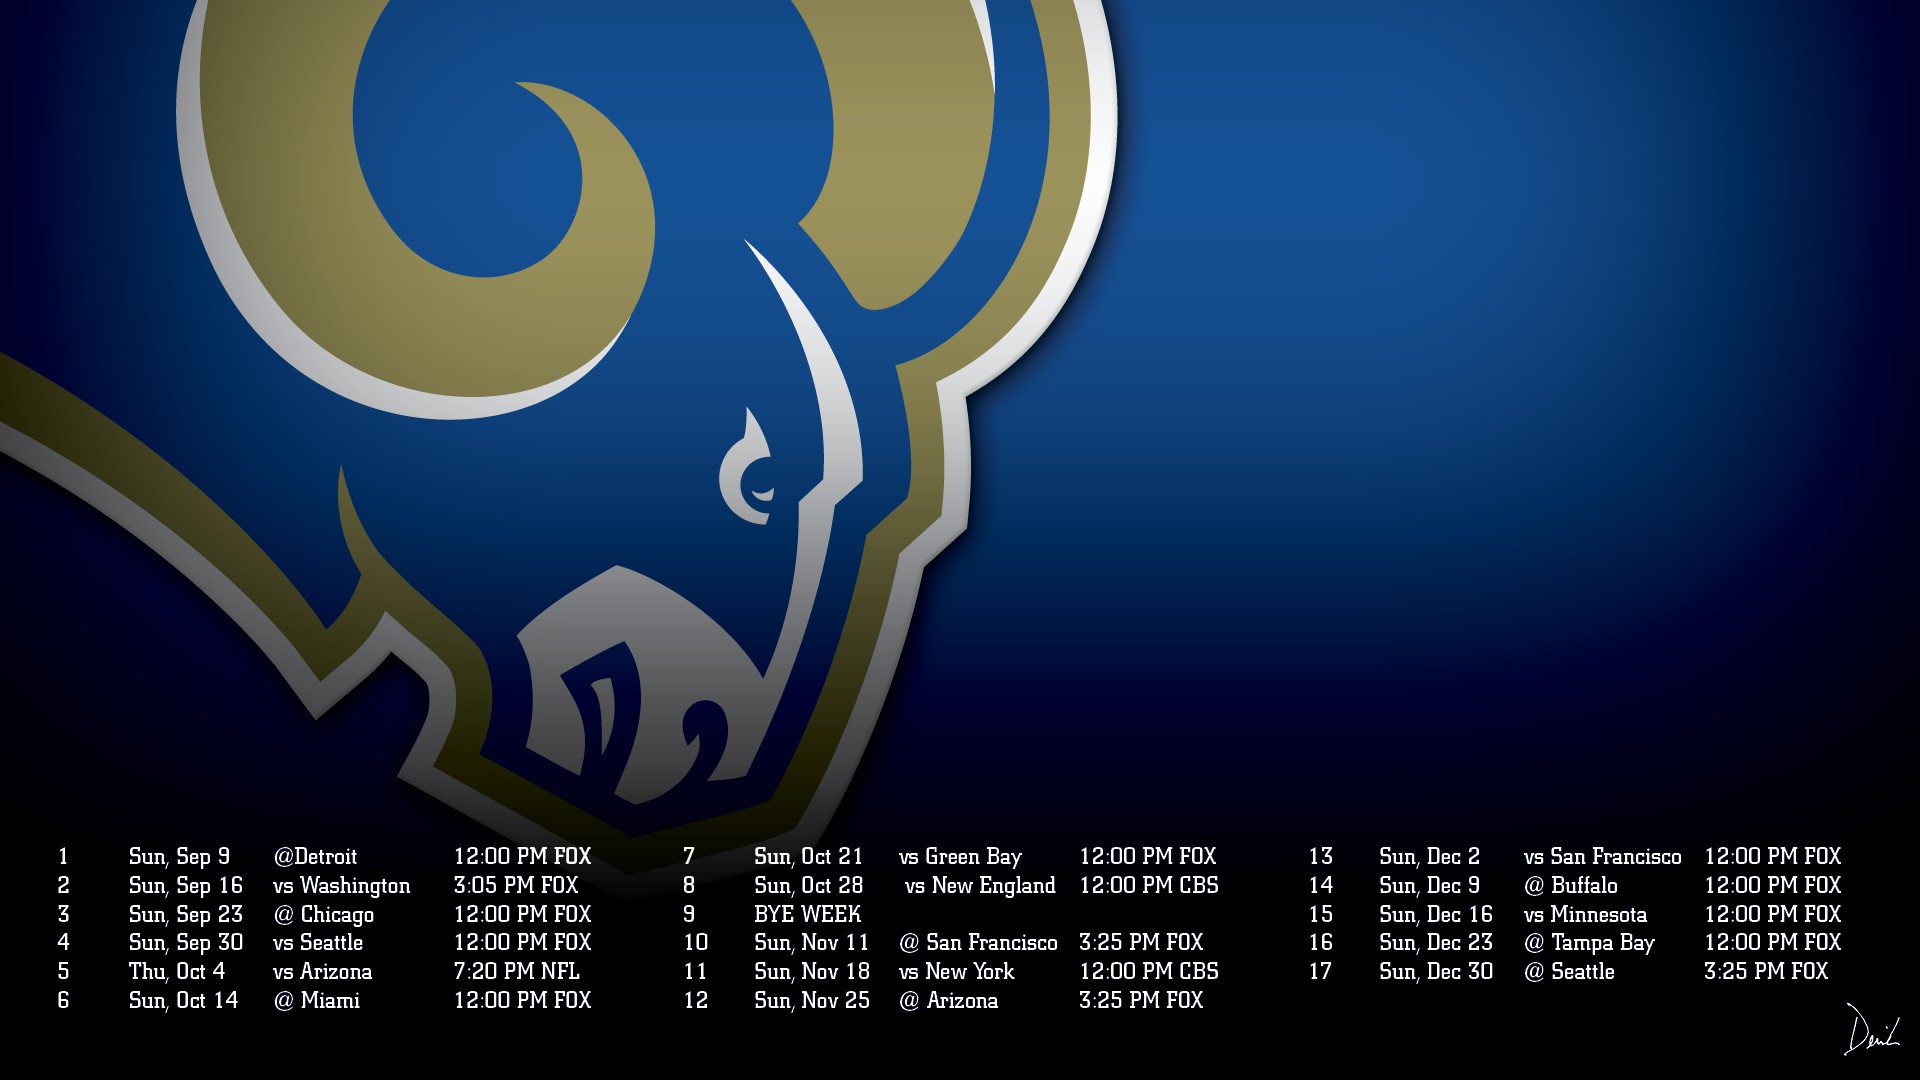 Los Angeles Rams Wallpaper For Mac Backgrounds With Resolution 1920X1080 pixel. You can make this wallpaper for your Mac or Windows Desktop Background, iPhone, Android or Tablet and another Smartphone device for free